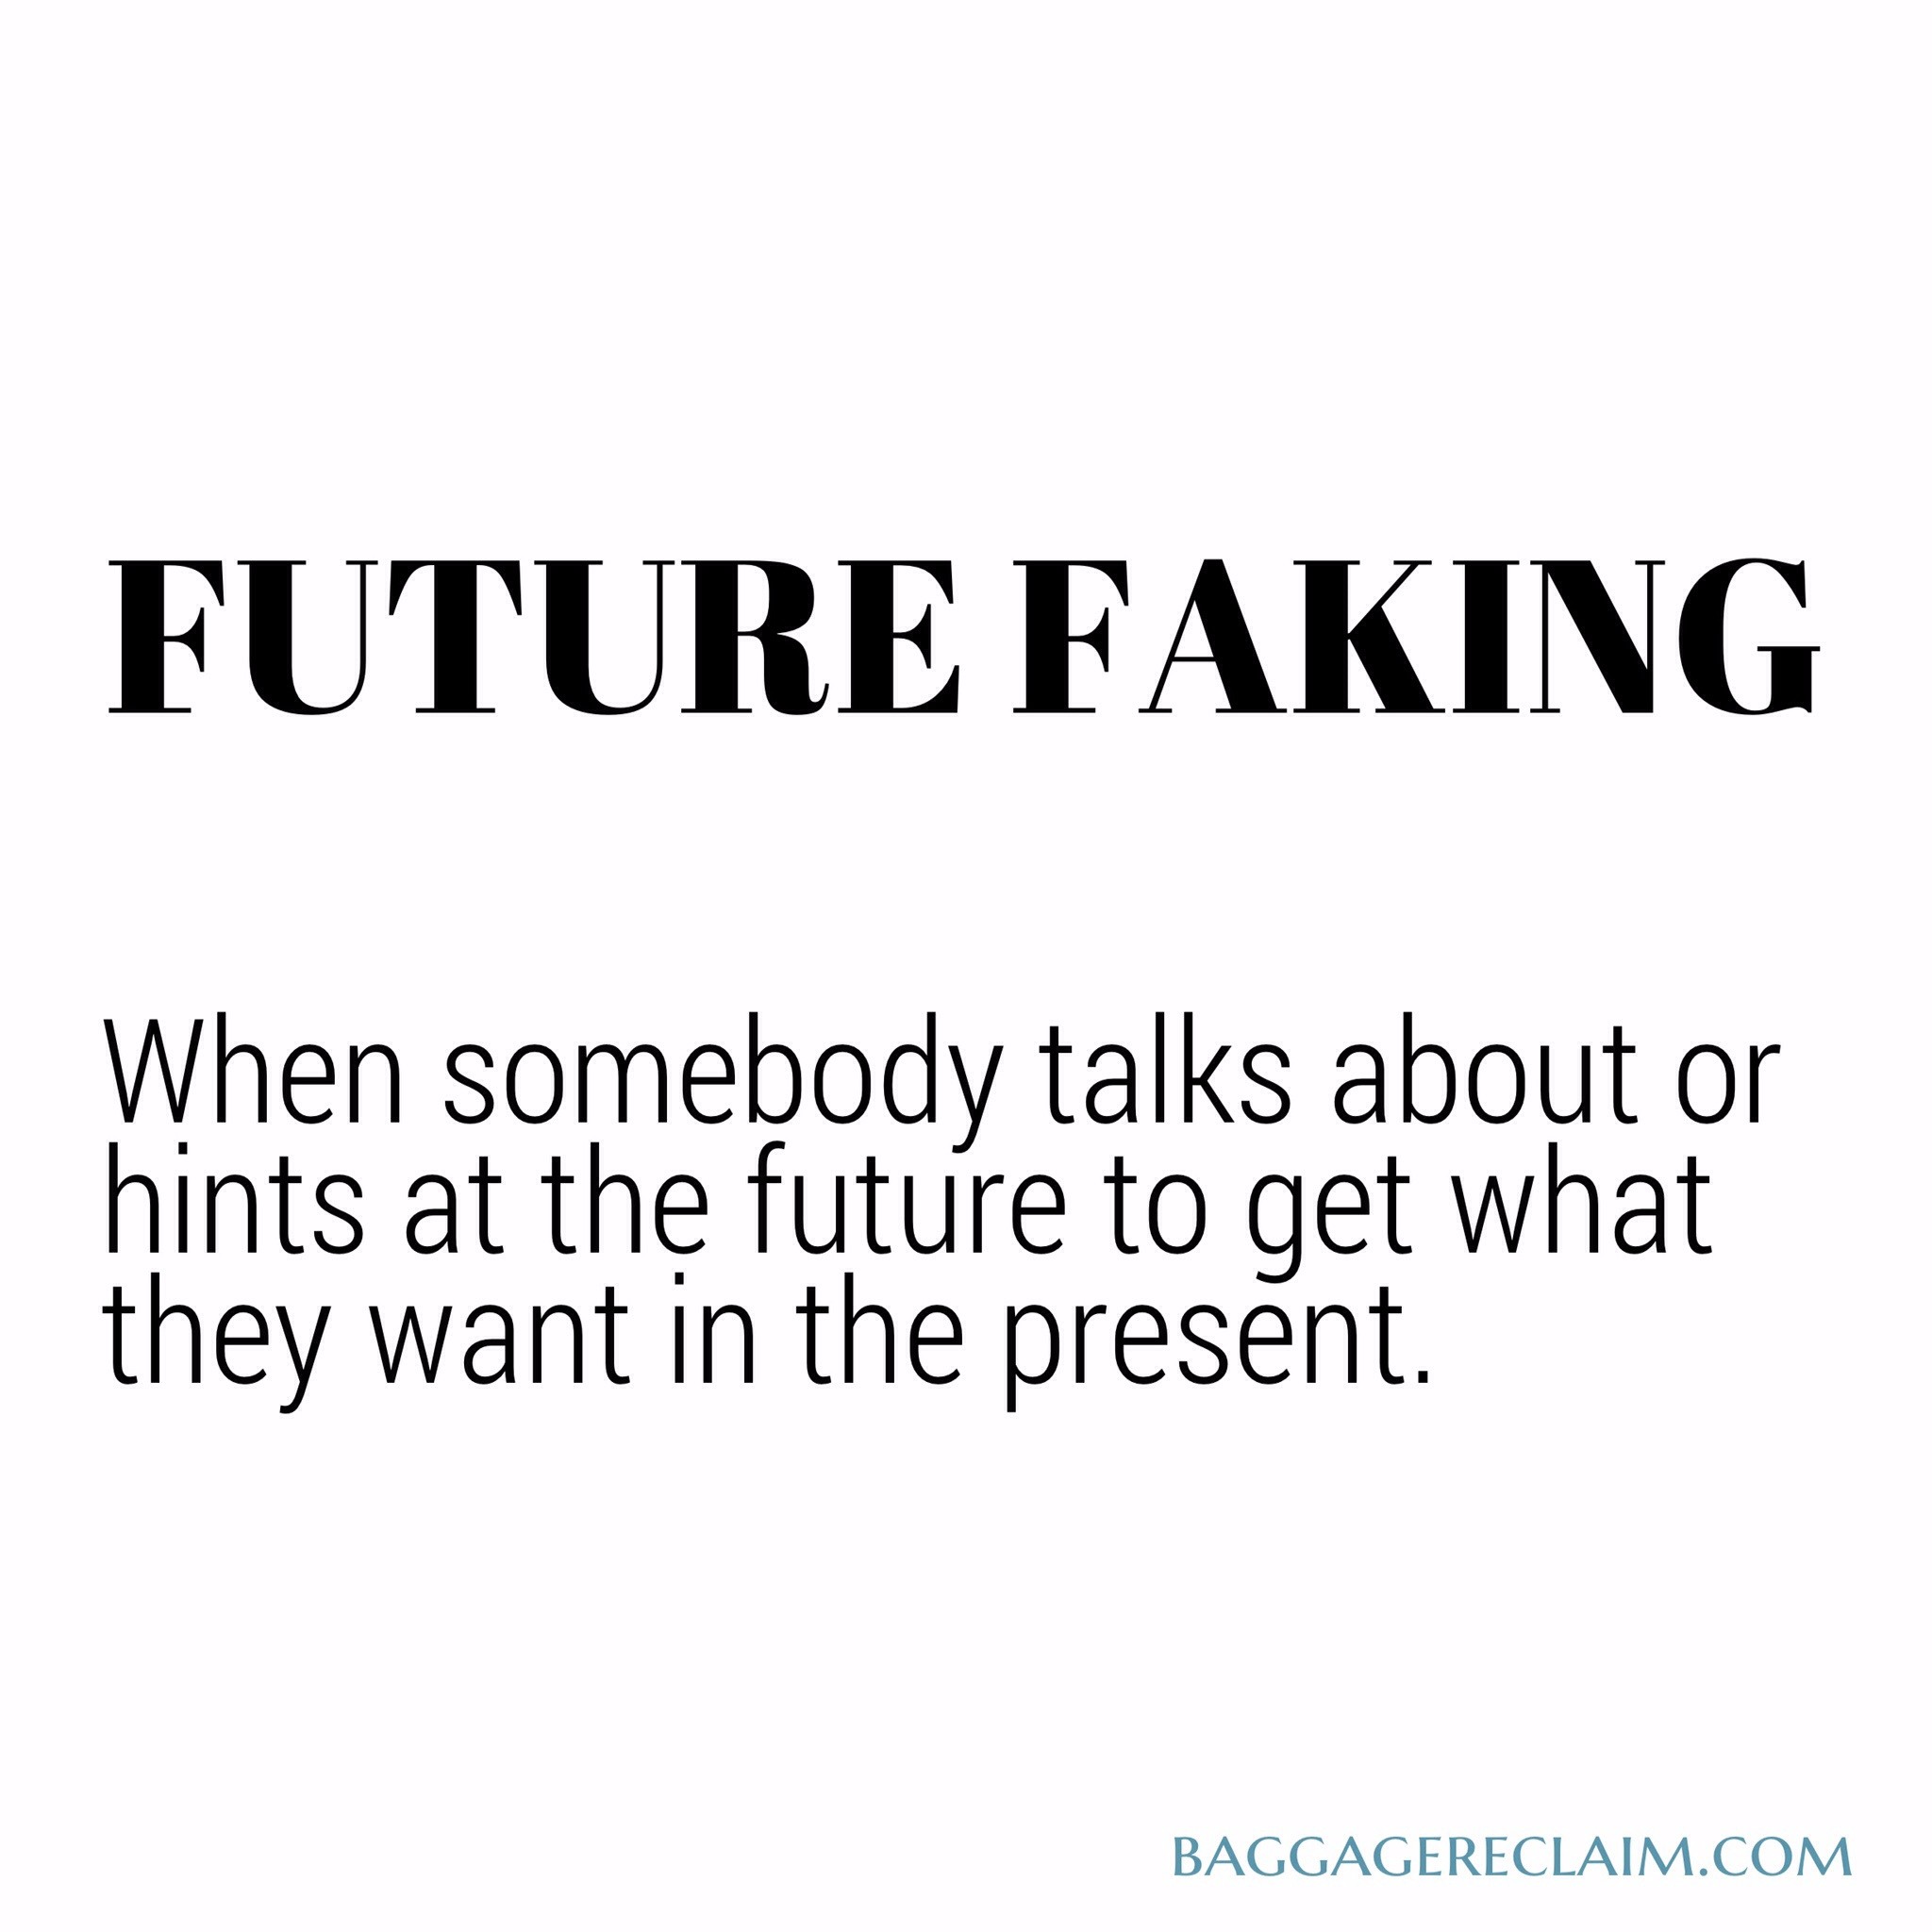 Future Faking is Not Accidental!